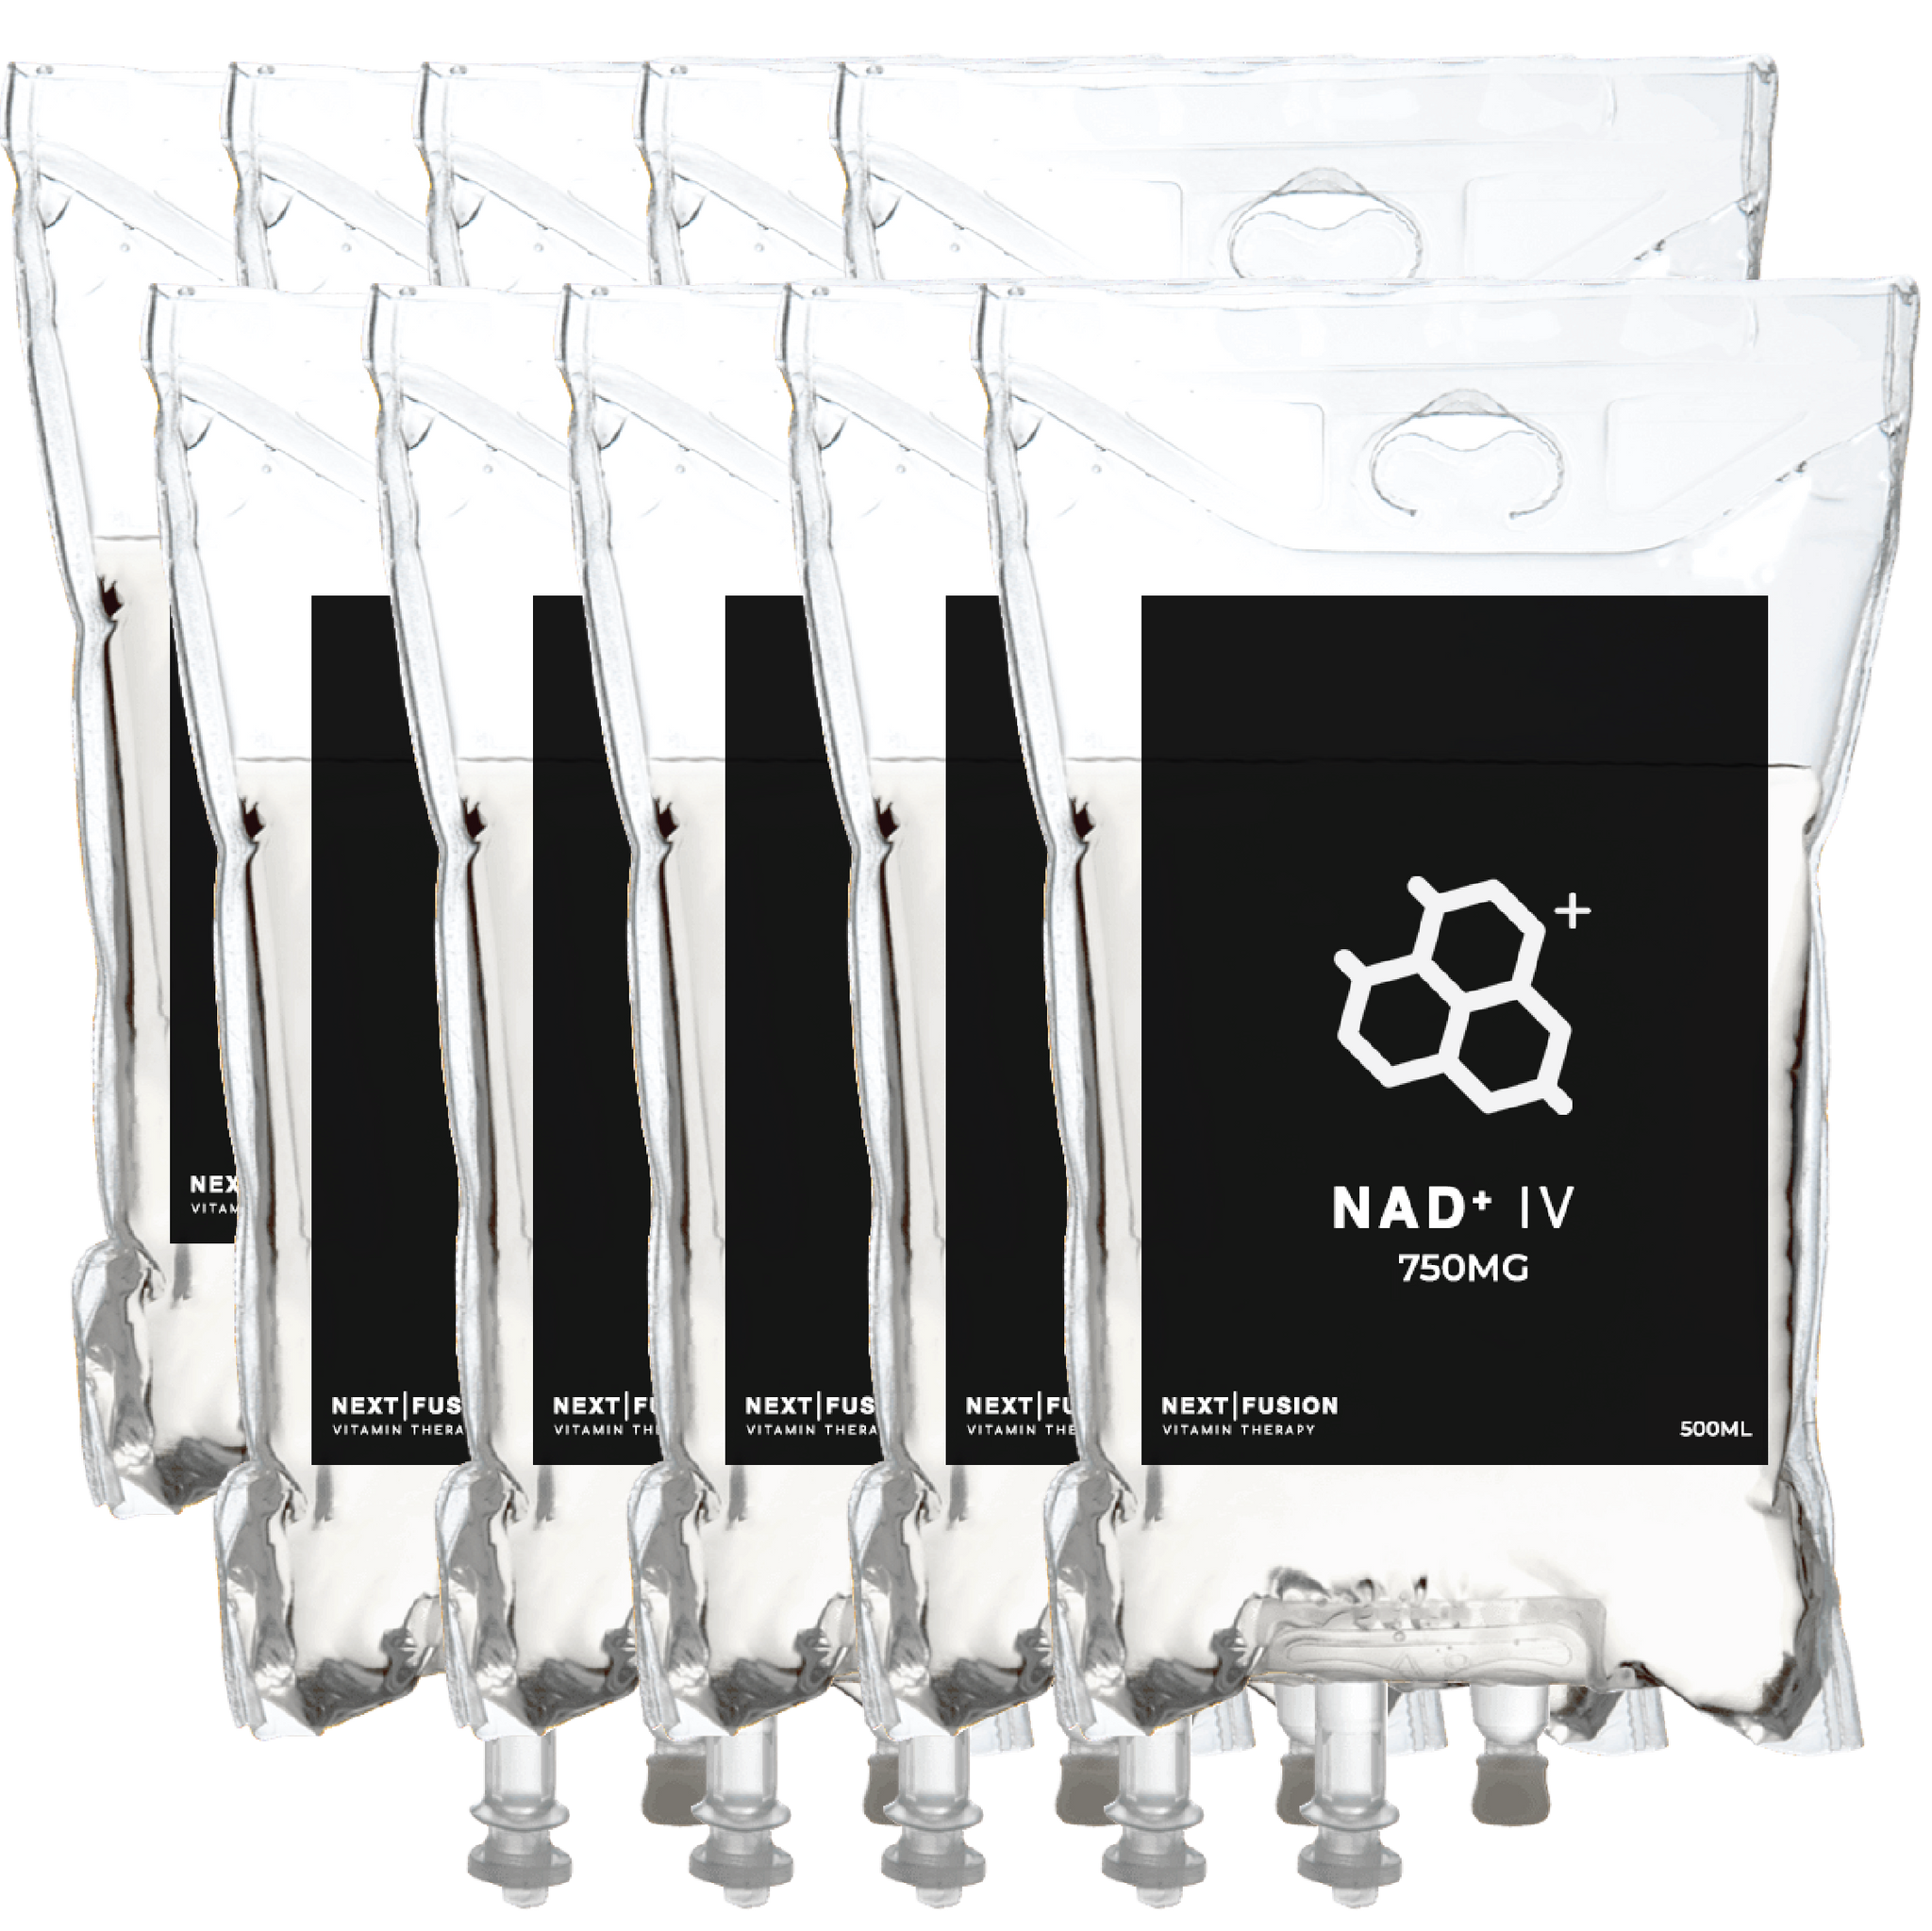 SAVE 30%: 10-Pack of NAD+ IV Therapy Drip 750mg